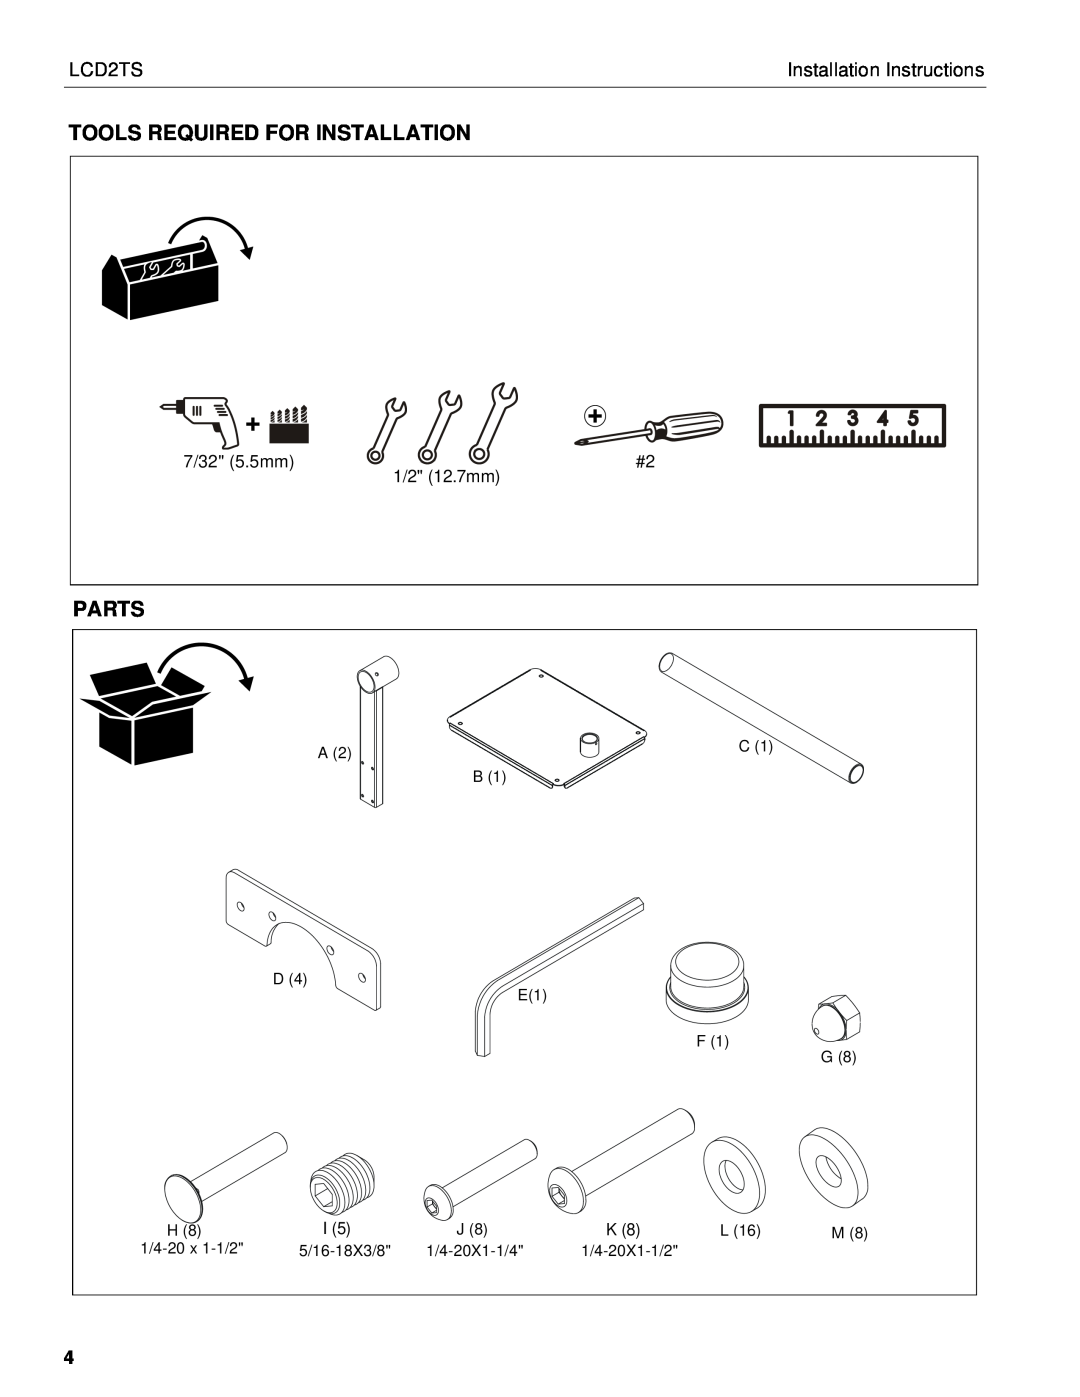 Chief Manufacturing LCD2TS Tools Required For Installation, Parts, Installation Instructions, 7/32 5.5mm 